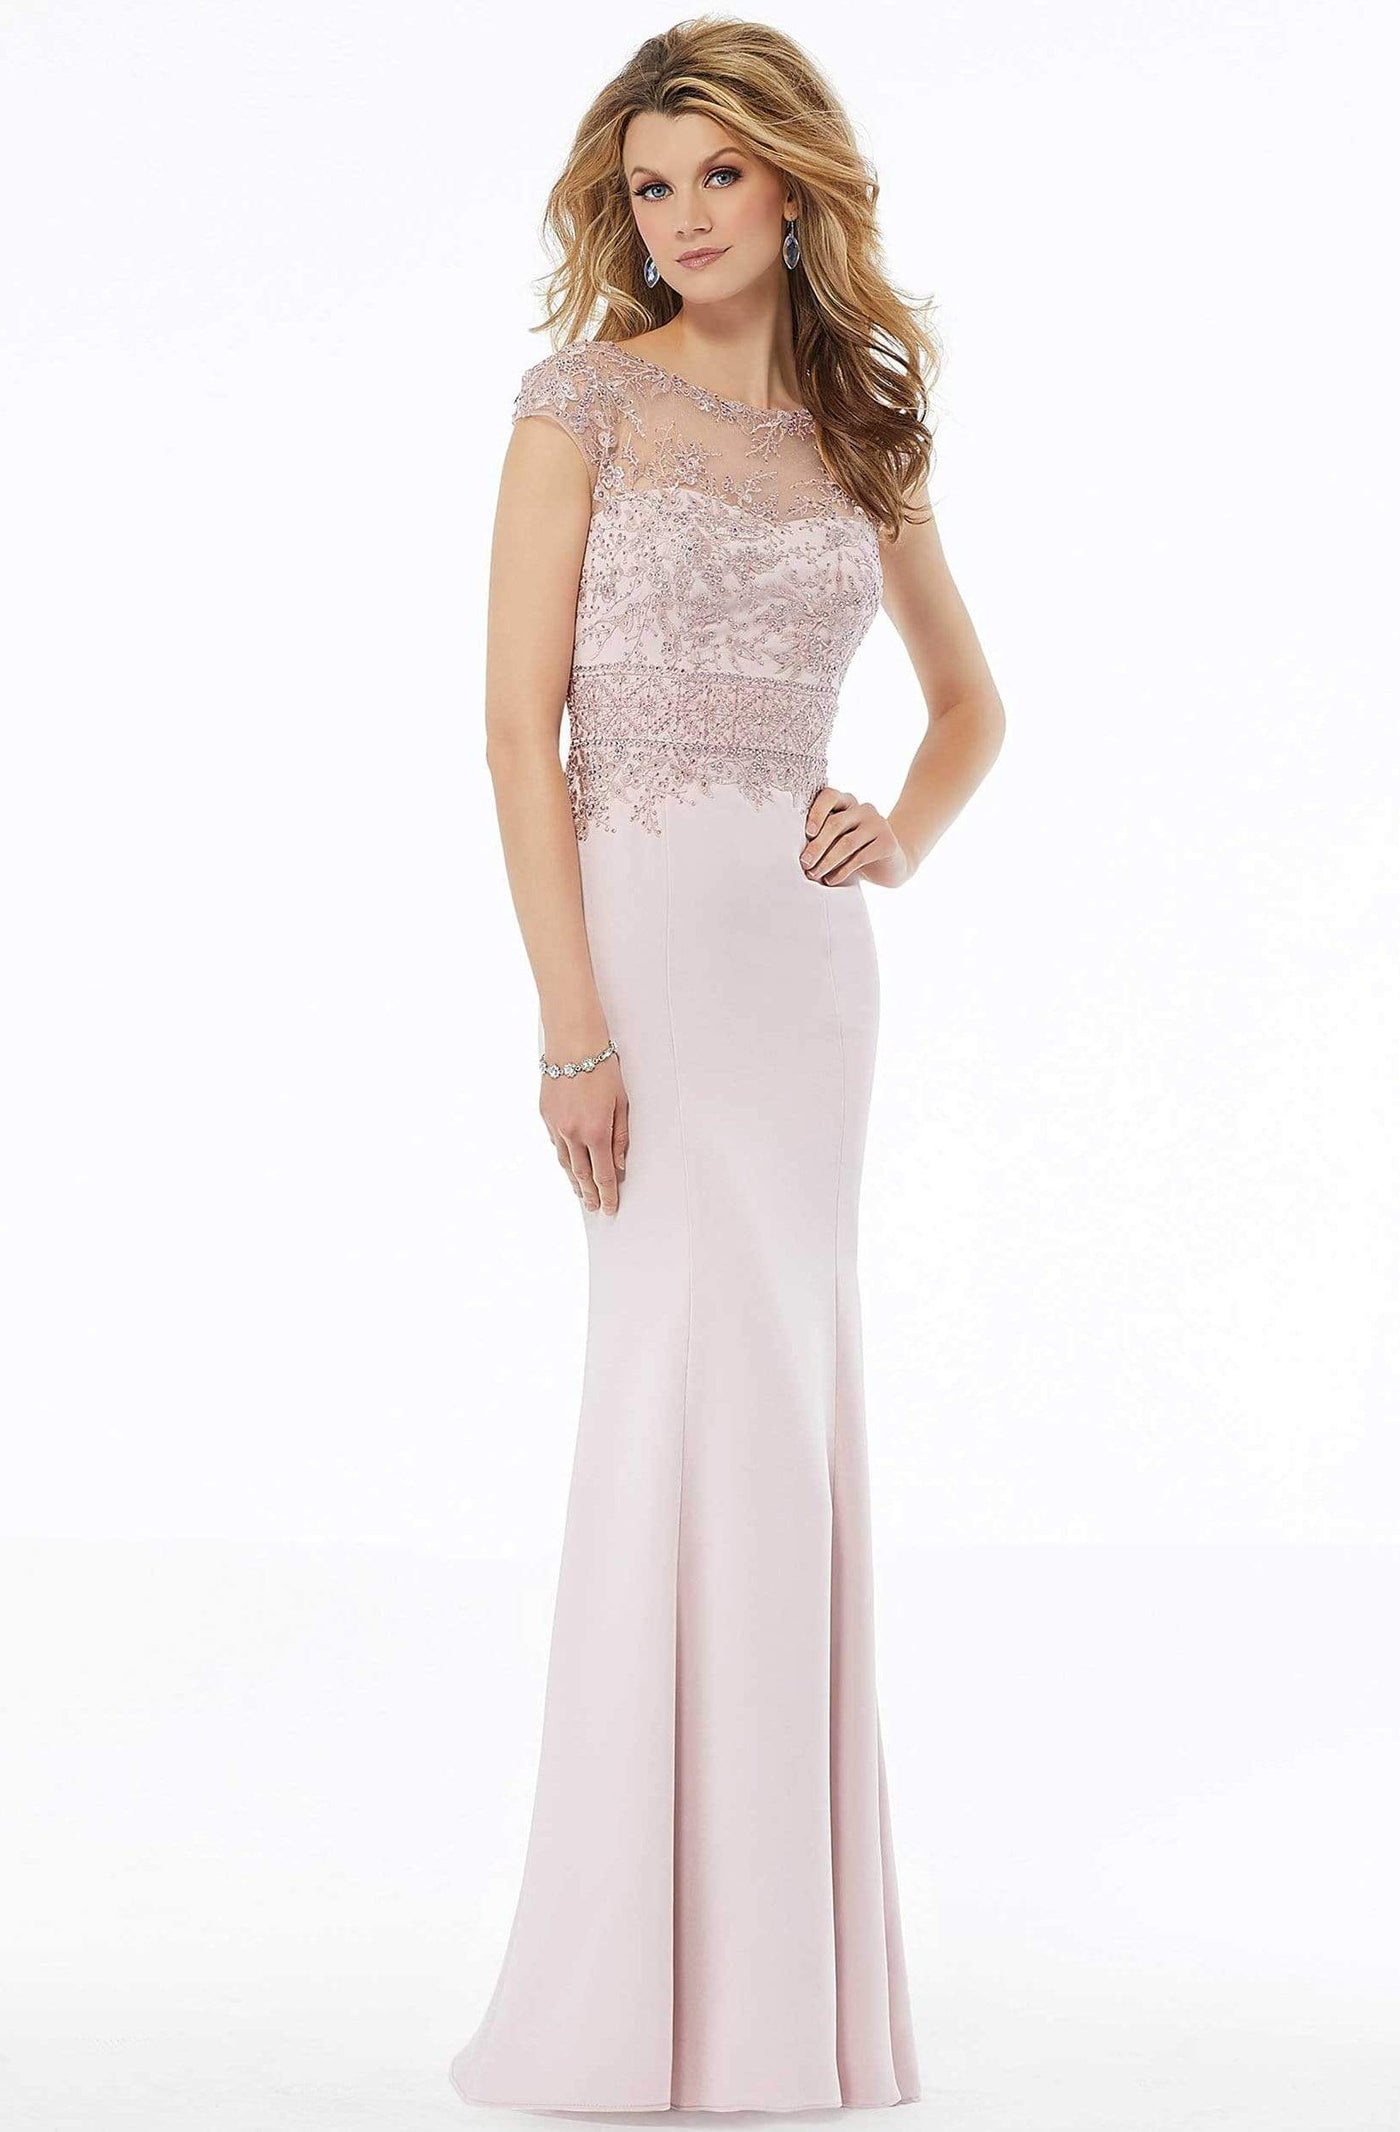 MGNY By Mori Lee - 72127 Embroidered Bateau Stretch Crepe Sheath Dress Mother of the Bride Dresses 2 / Blush